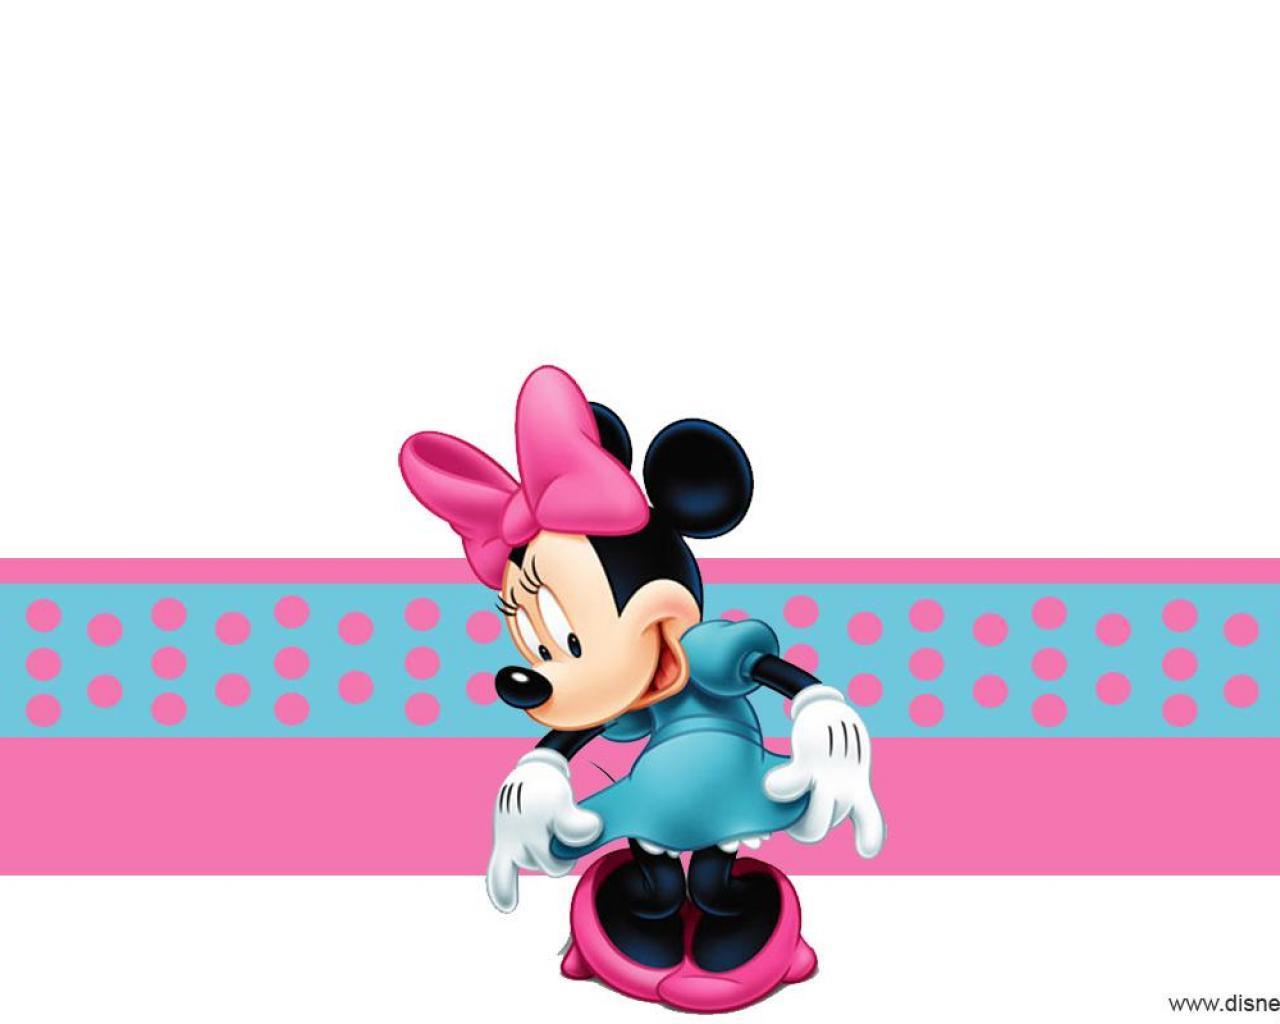 Minnie Mouse Wallpapers Wallpaper Cave HD Wallpapers Download Free Images Wallpaper [wallpaper981.blogspot.com]